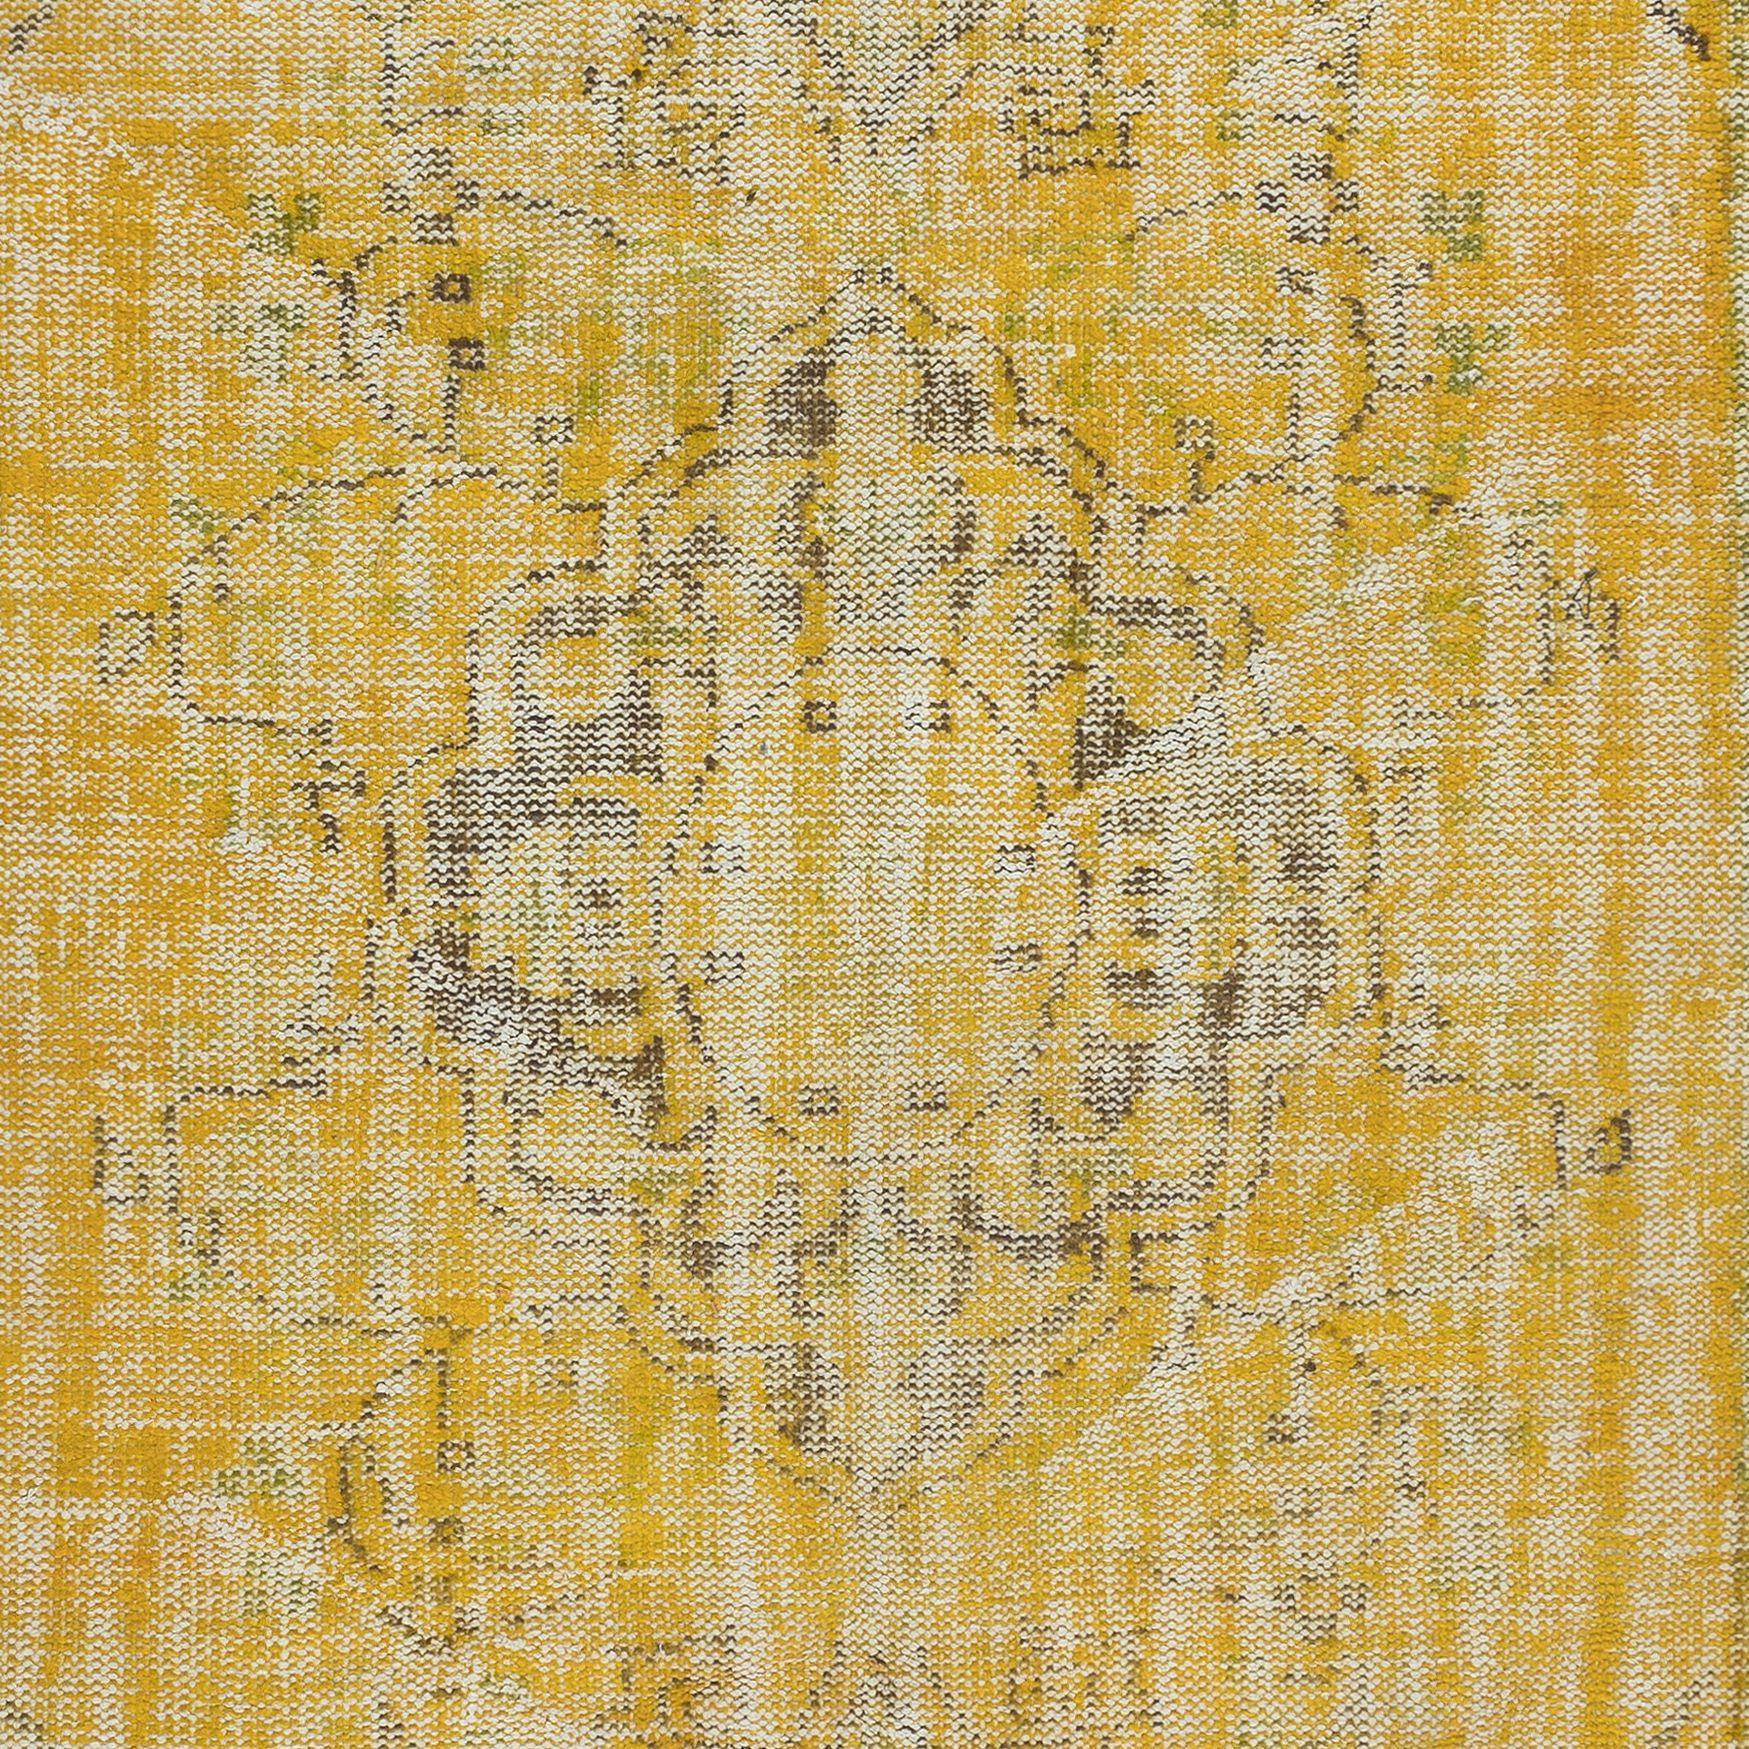 Hand-Woven 5.7x9.6 Ft Yellow Area Rug From Turkey, Hand Knotted Contemporary Wool Carpet For Sale